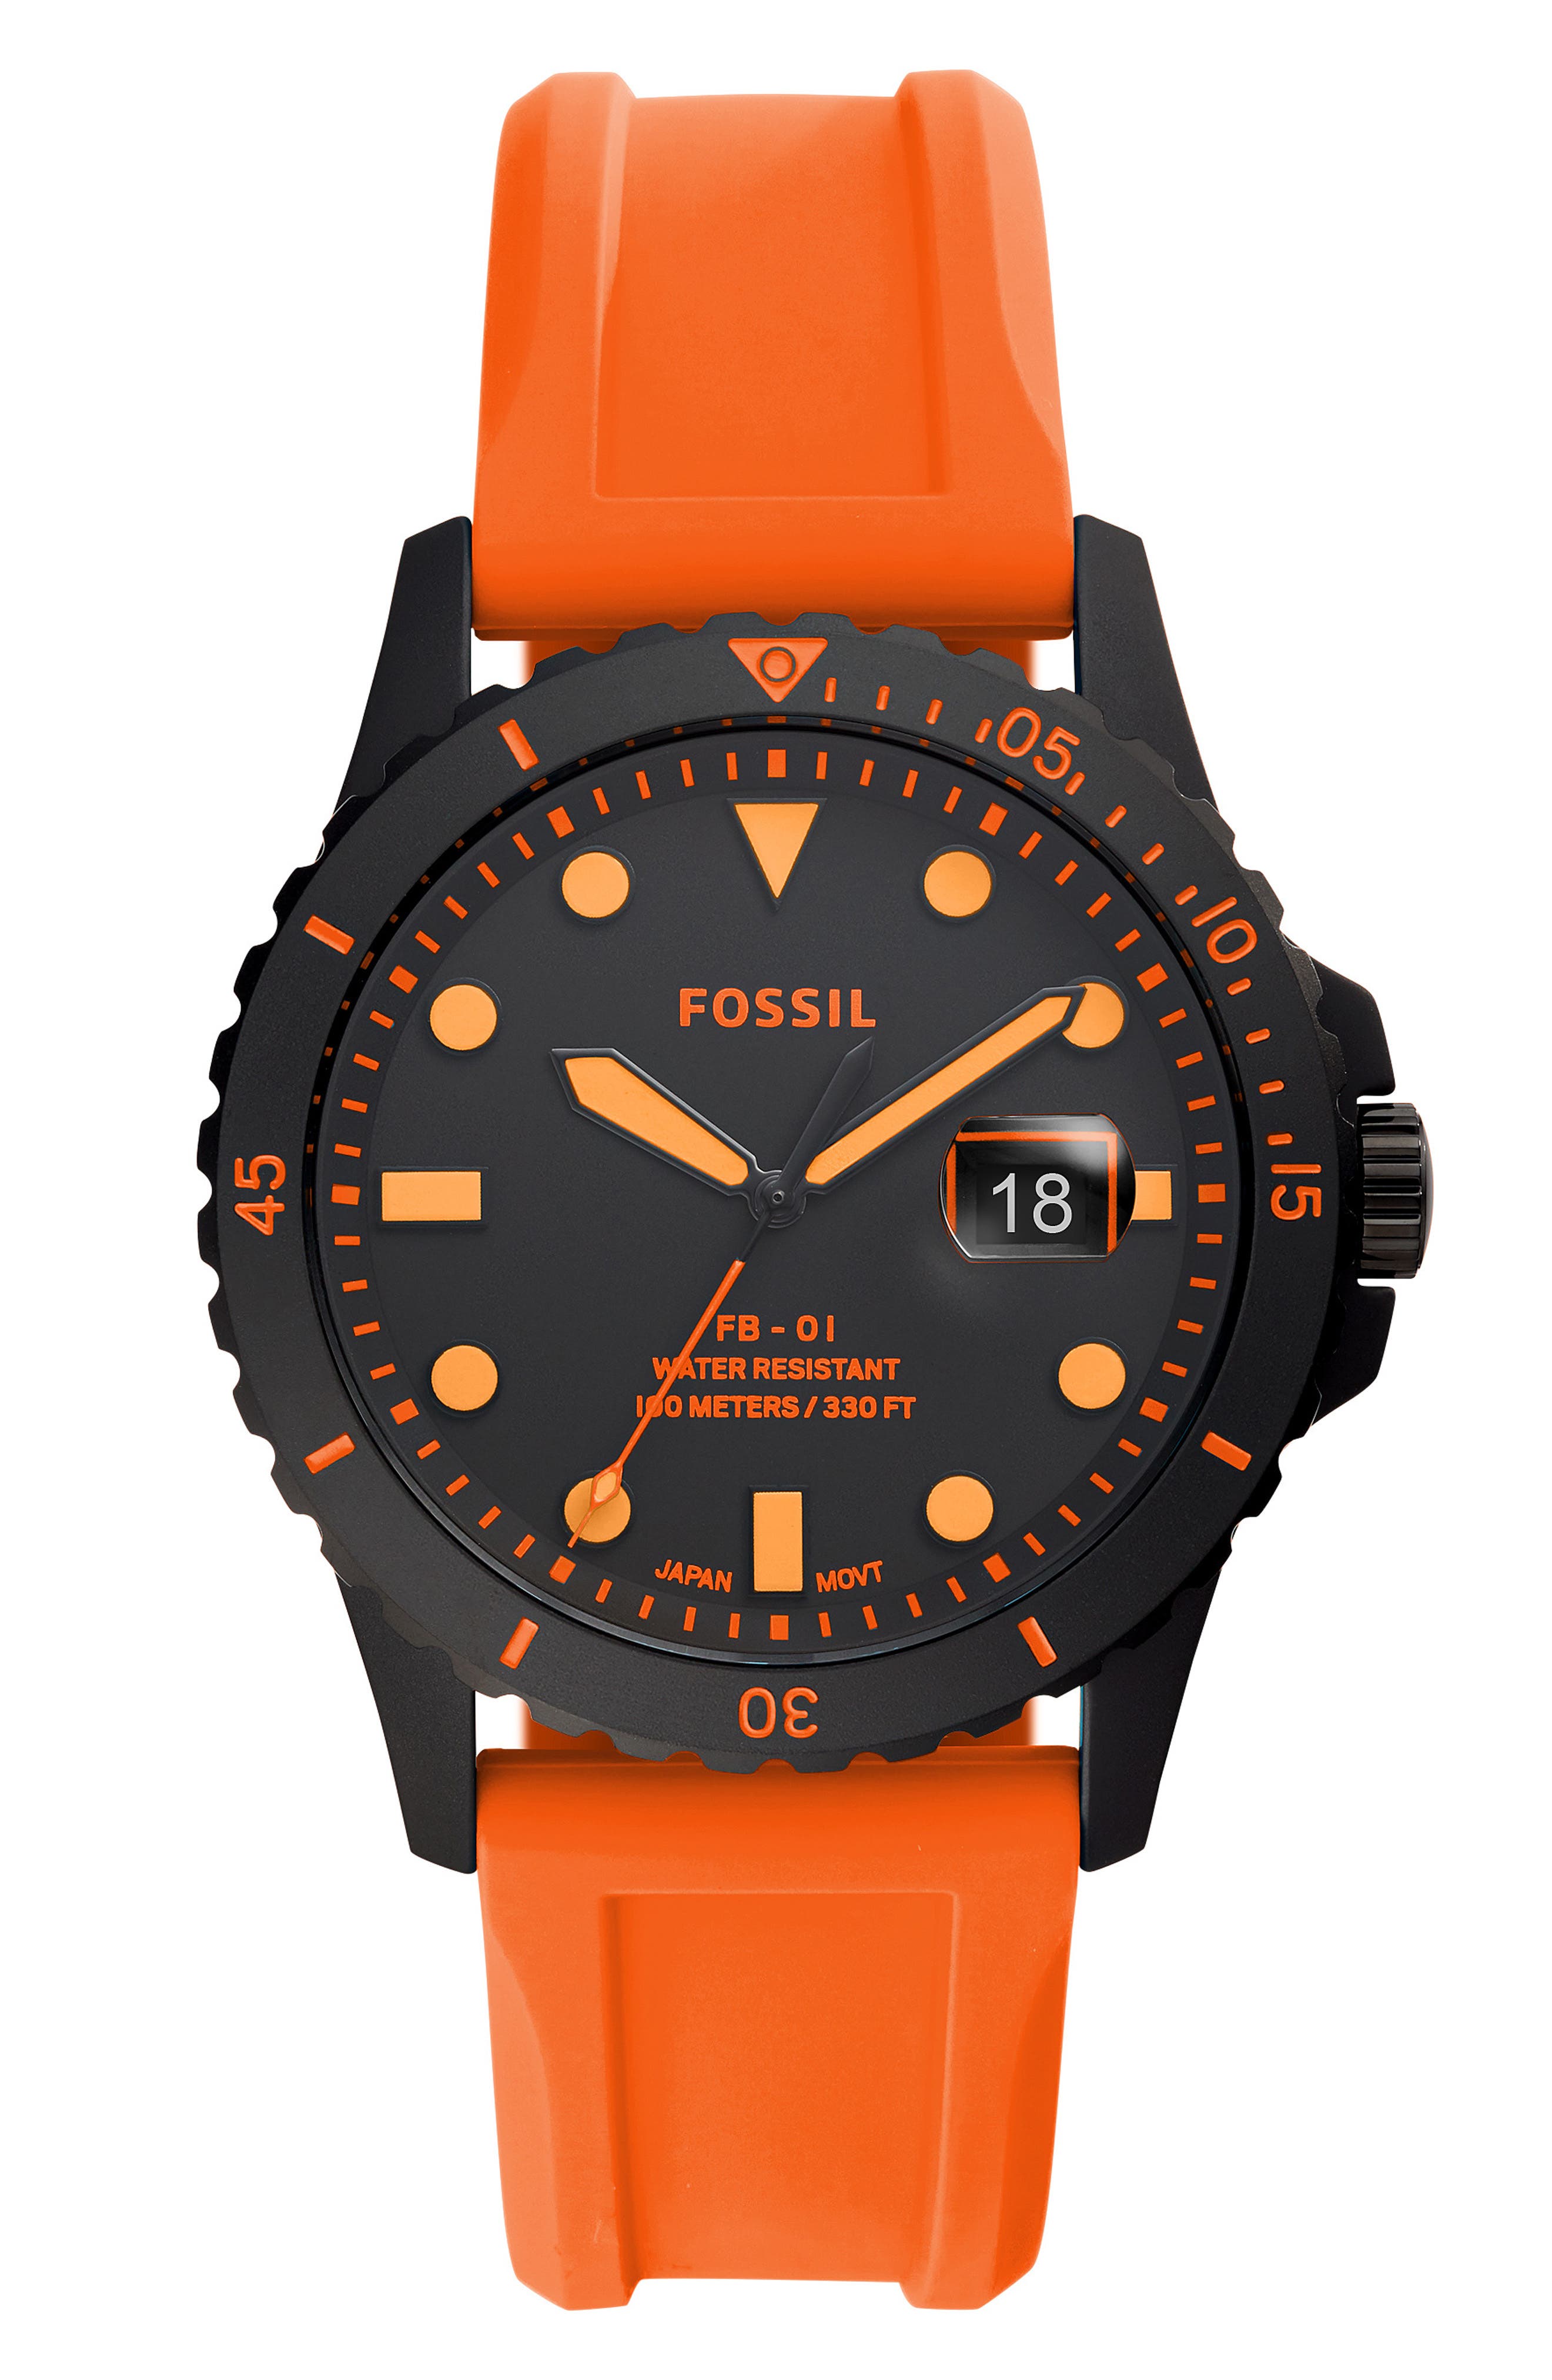 Fossil Rd Blk Blk Strap